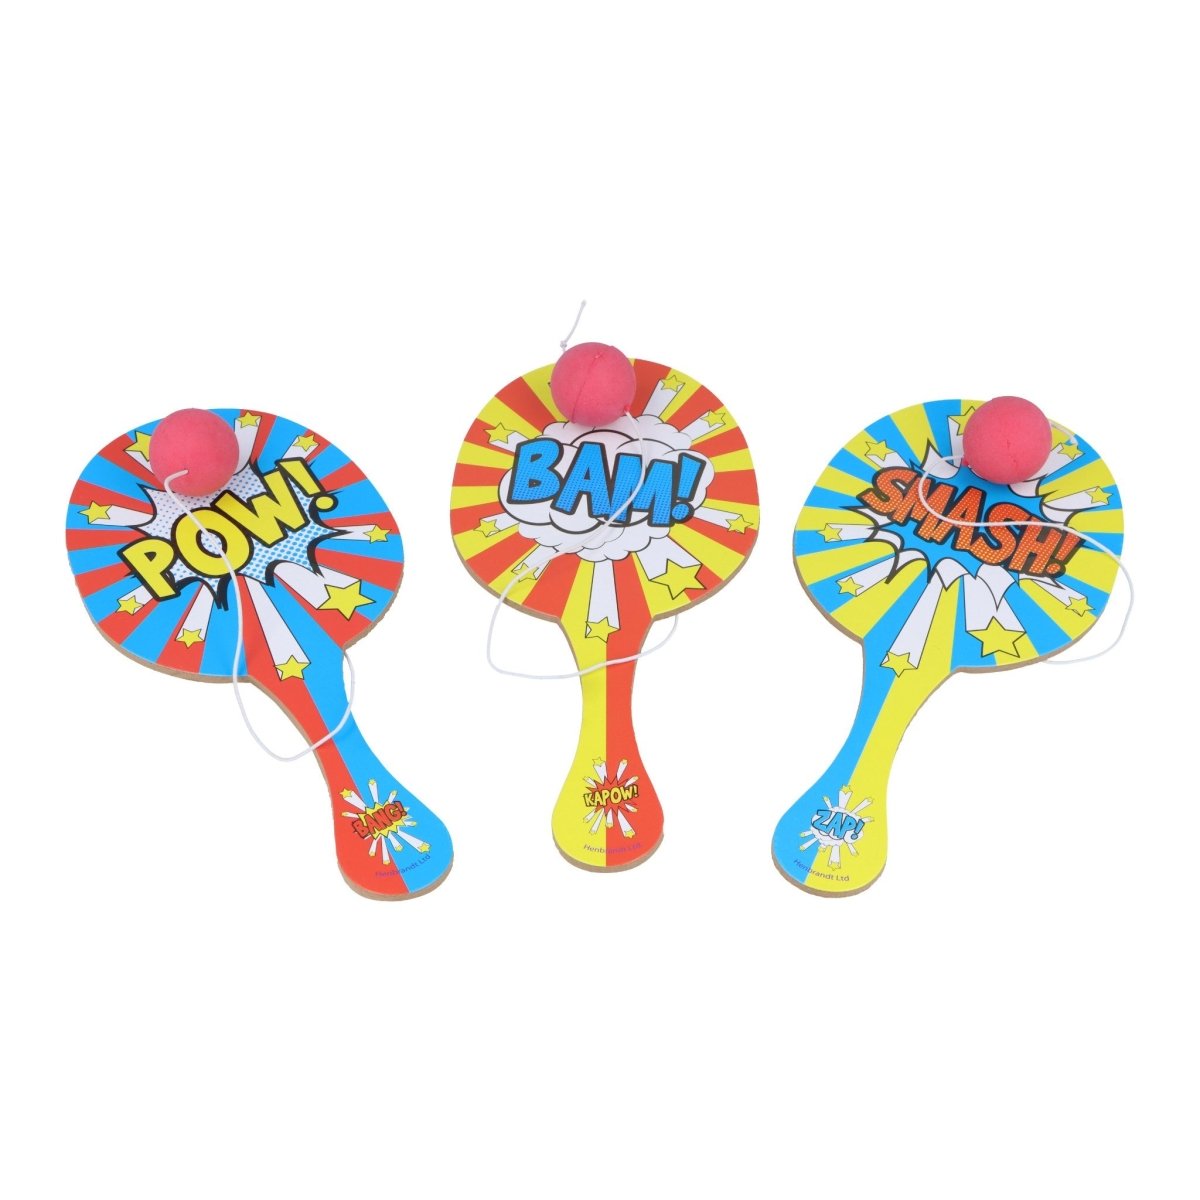 Comic Impact Wooden Paddle Bat and Ball Game (22cm) - Kids Party Craft